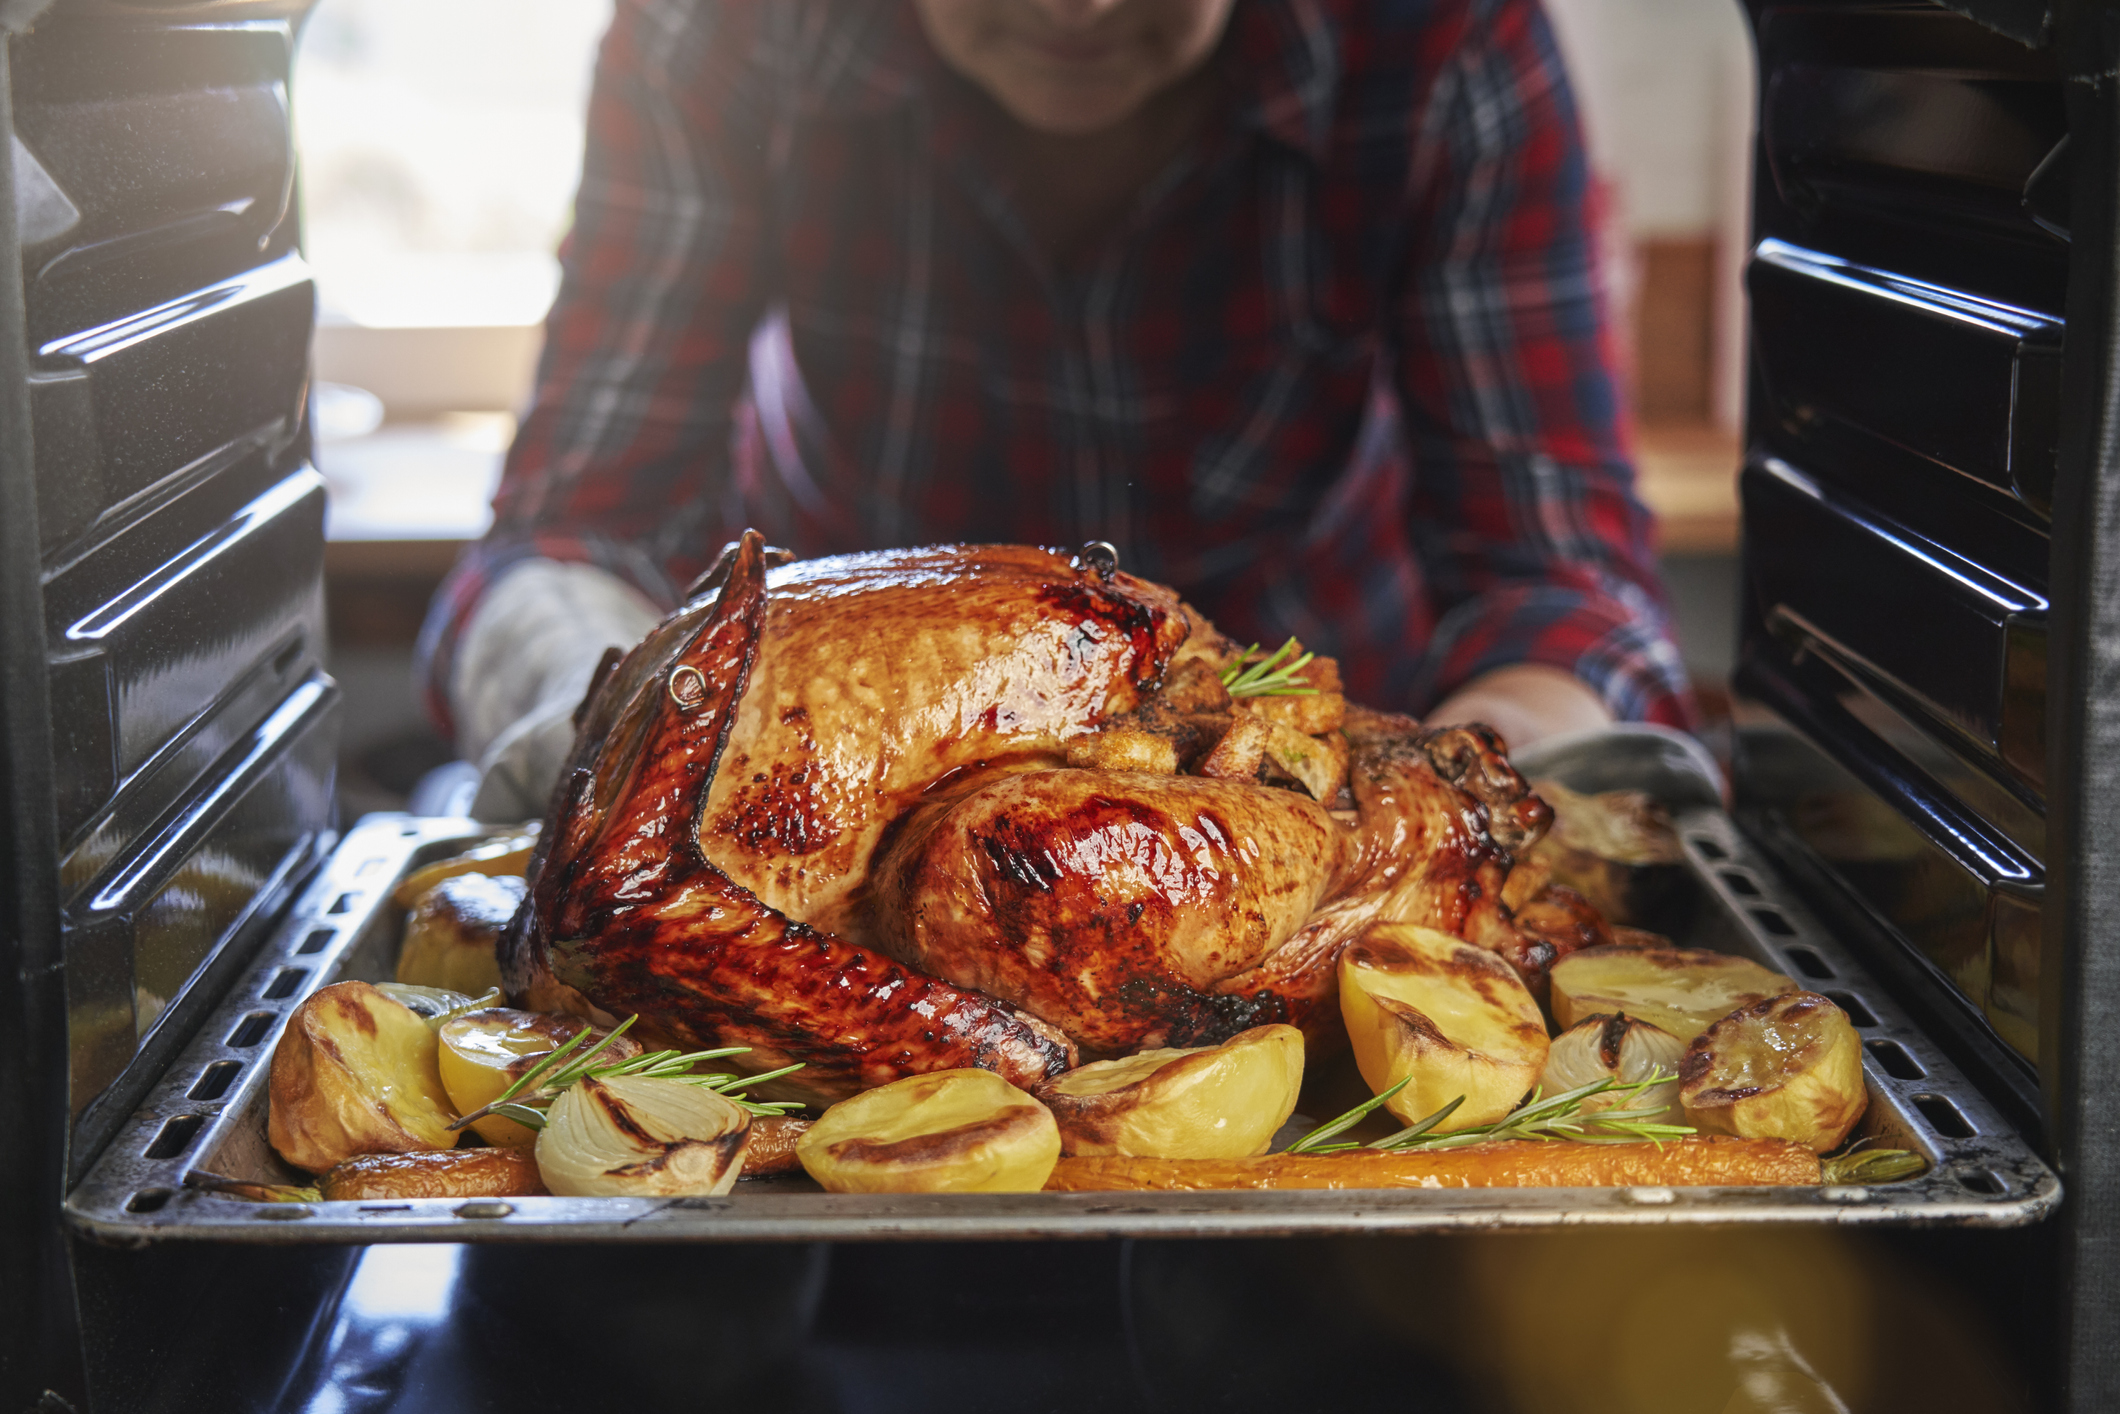 An photo from inside an oven of a person pulling a roast turkey and onions on a tray out of an oven.